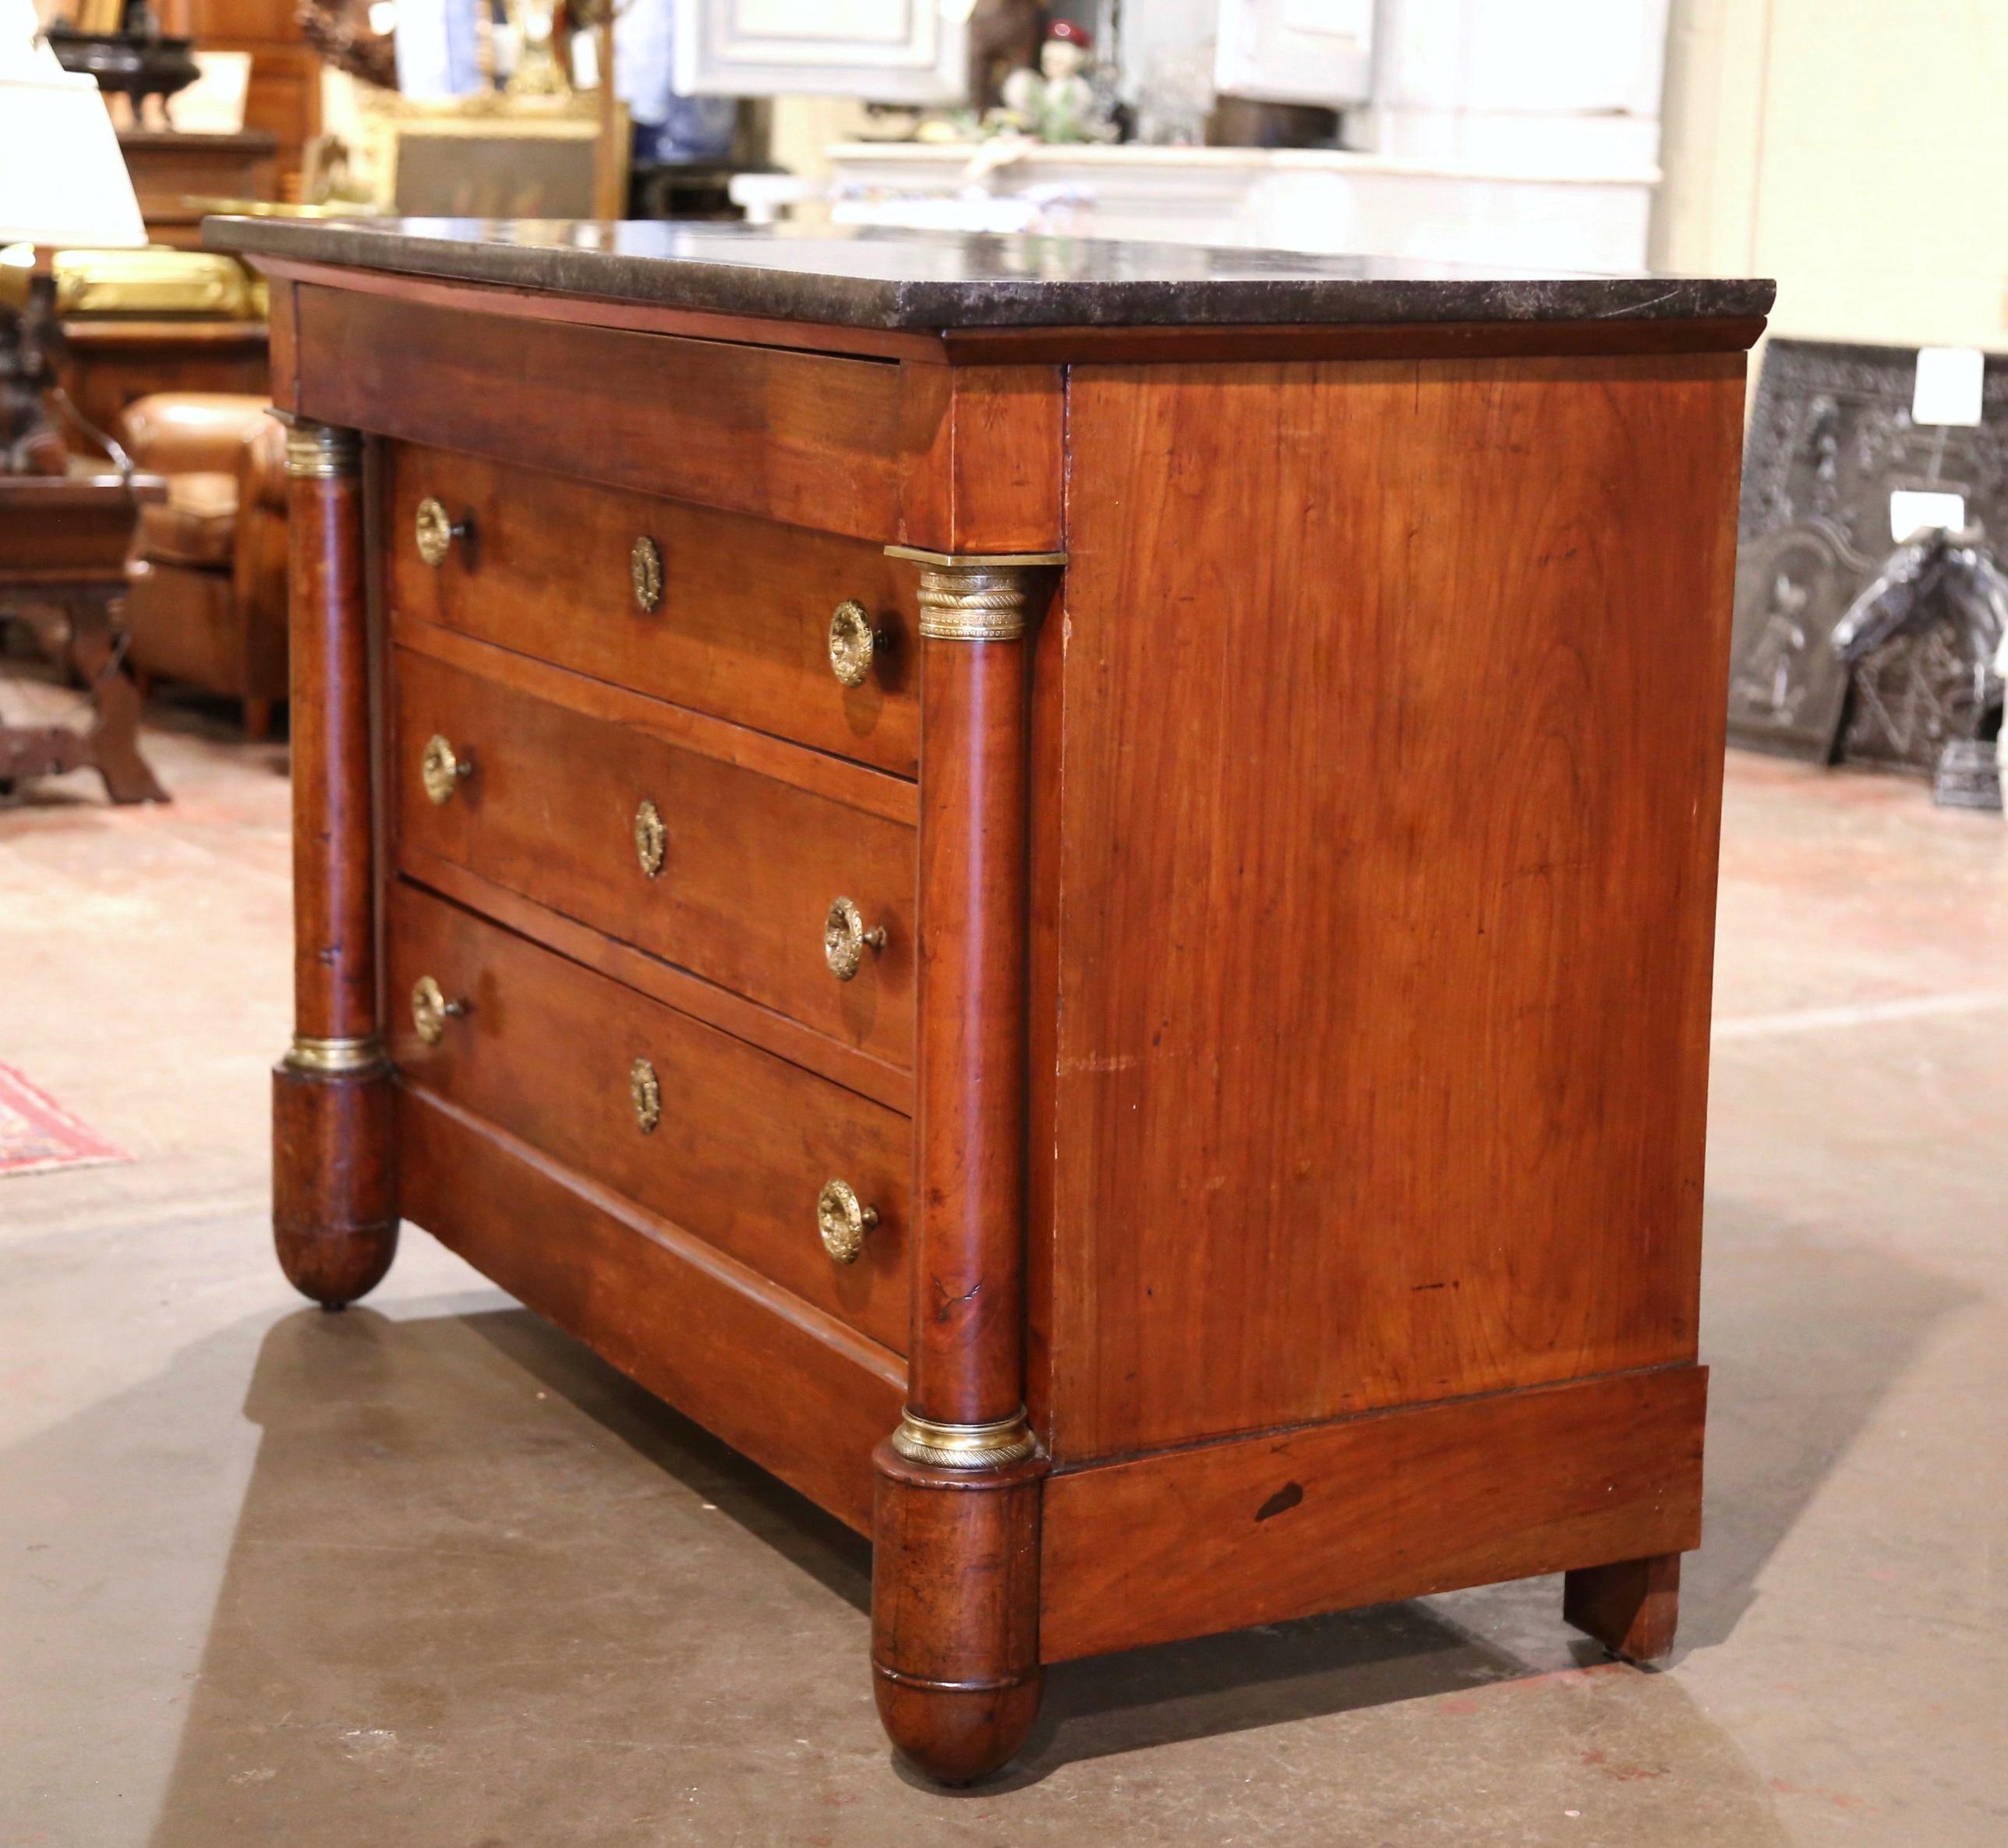 Hand-Carved 19th Century French Empire Marble Top Carved Walnut Commode Chest of Drawers For Sale